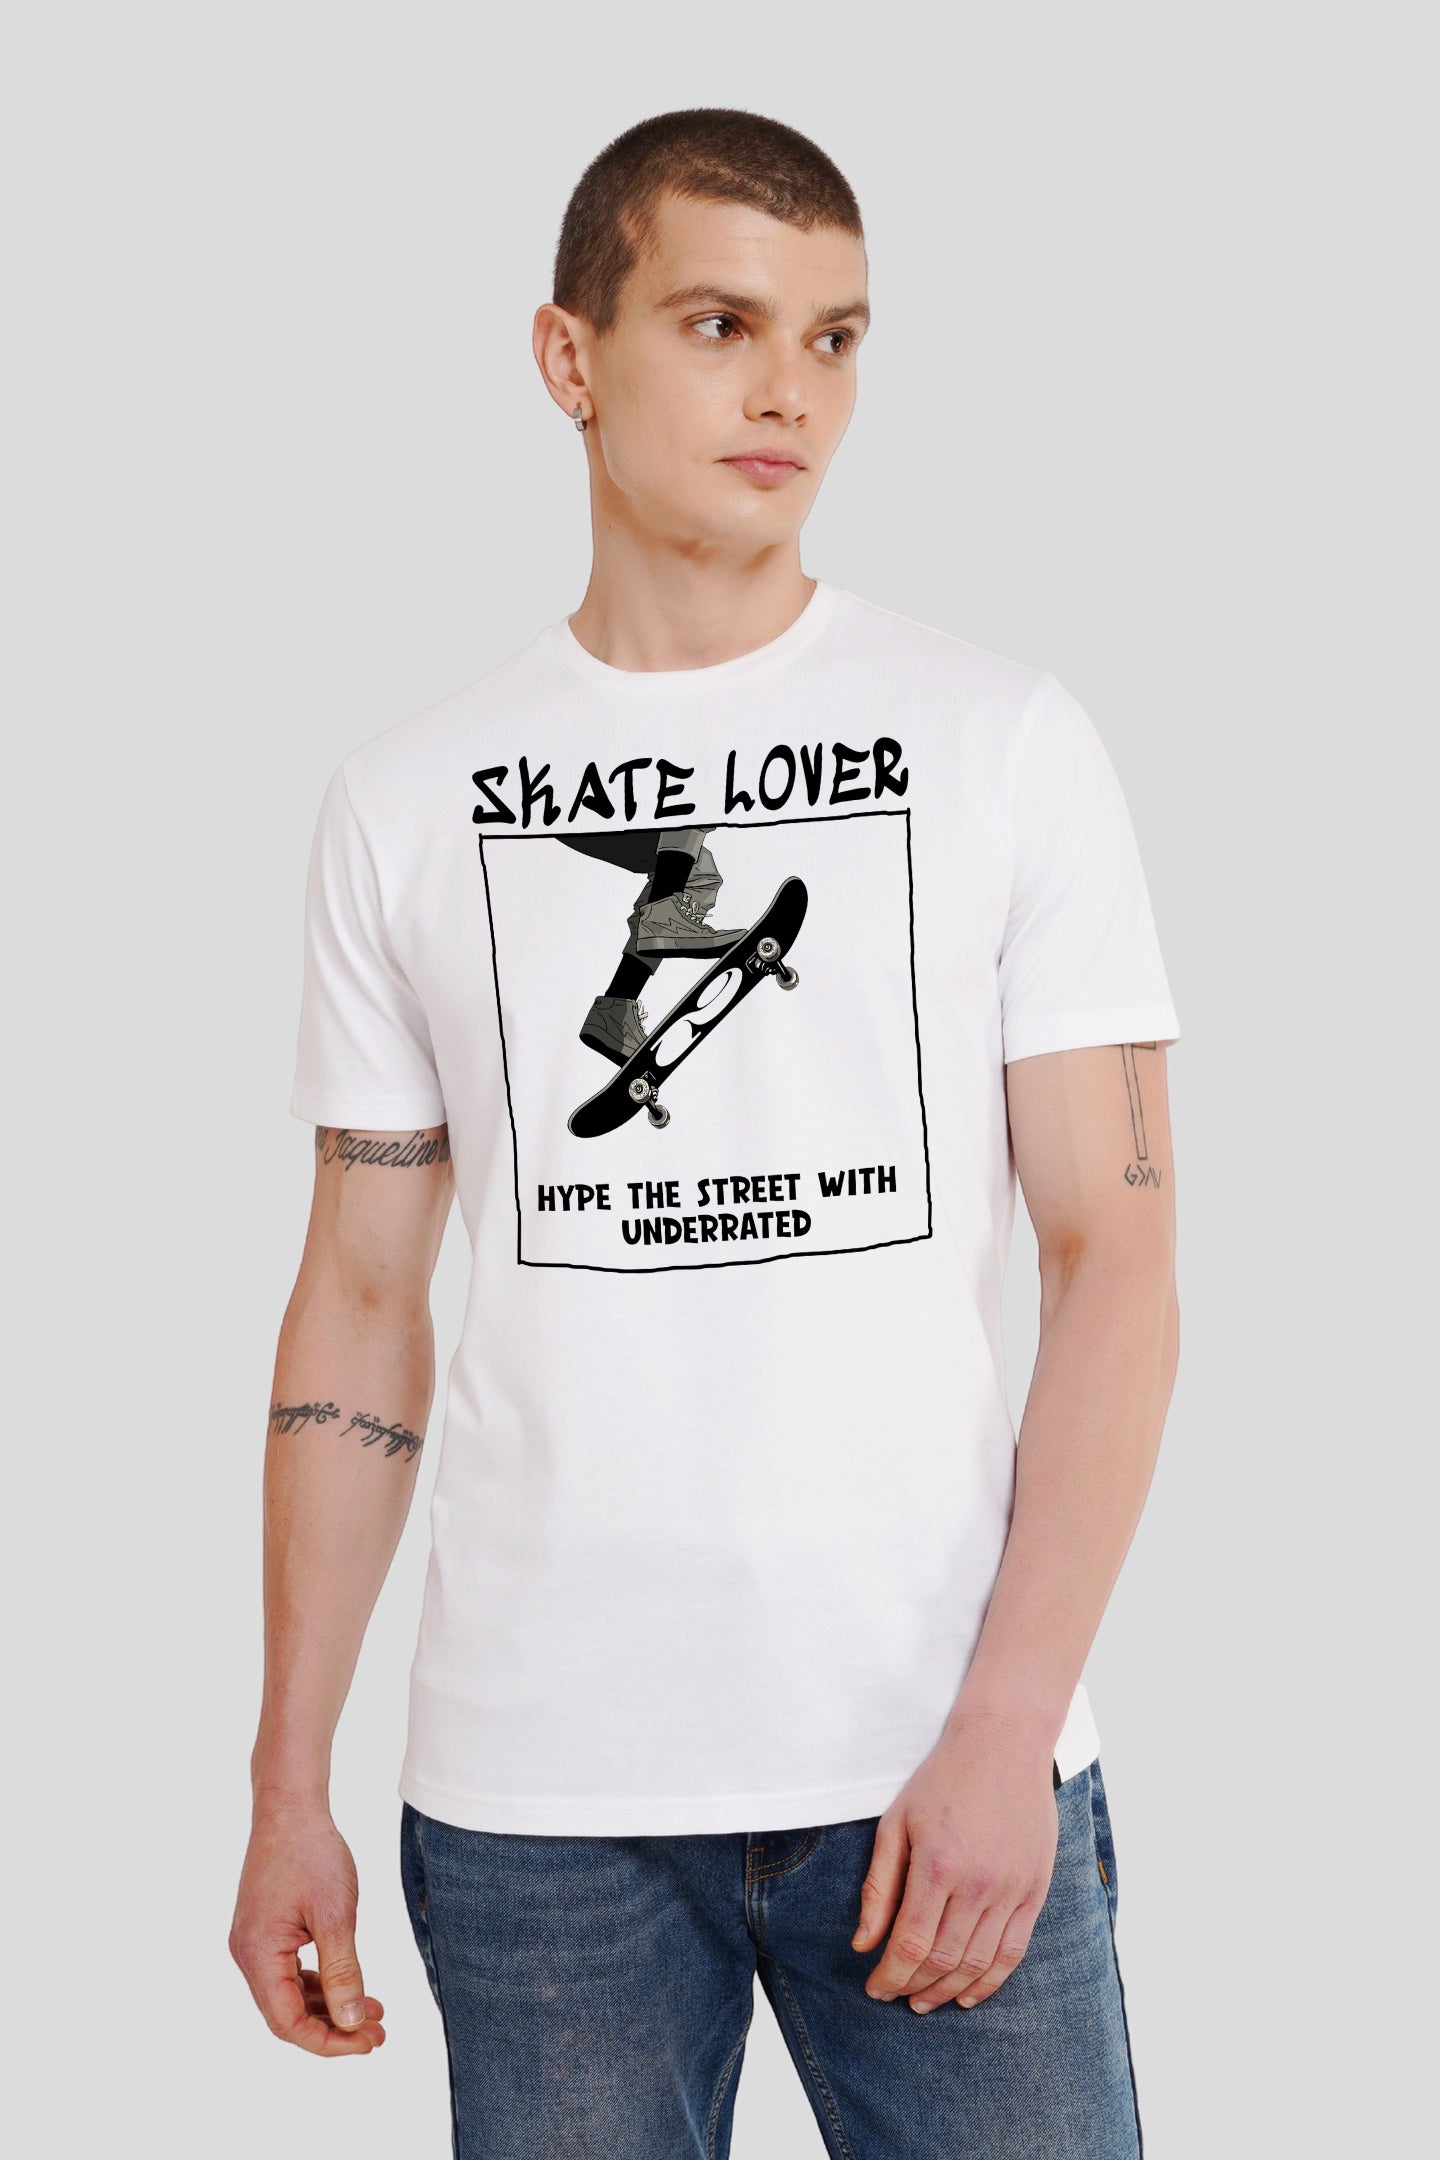 Skate Lover White Printed T Shirt Men Regular Fit With Front Design Pic 1